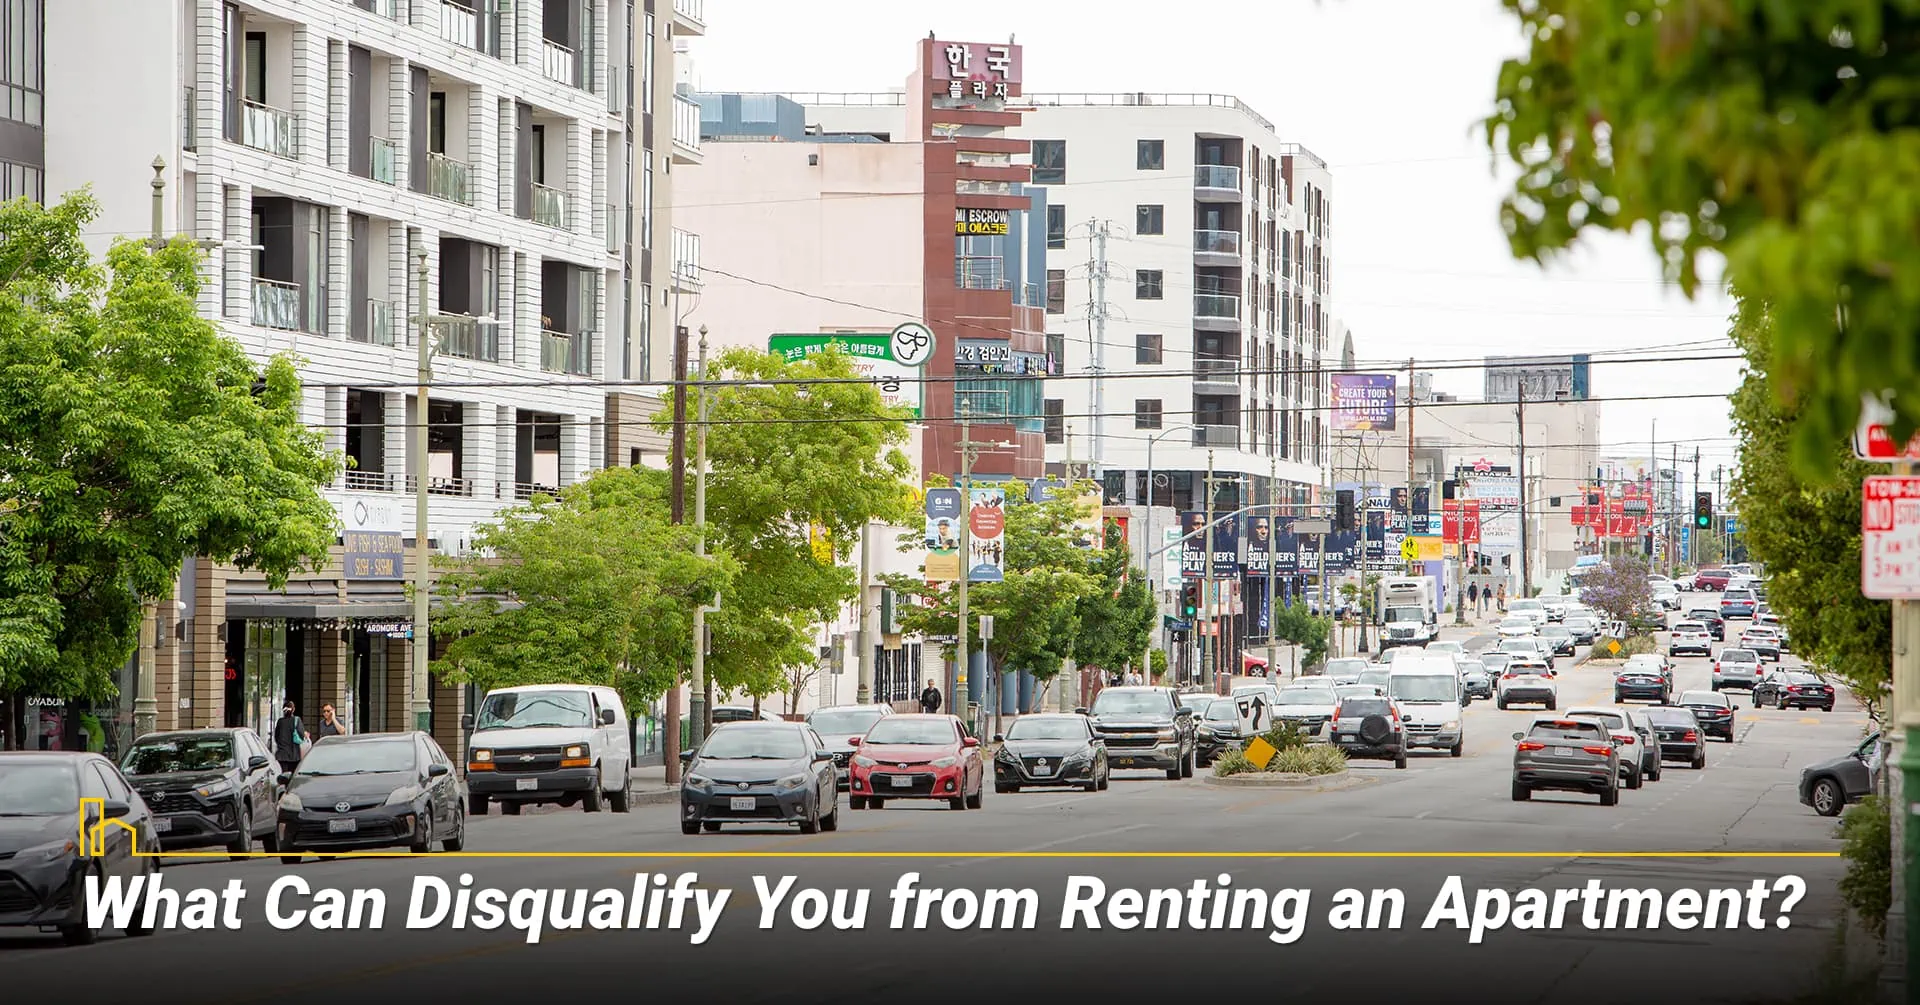 What Can Disqualify You from Renting an Apartment?